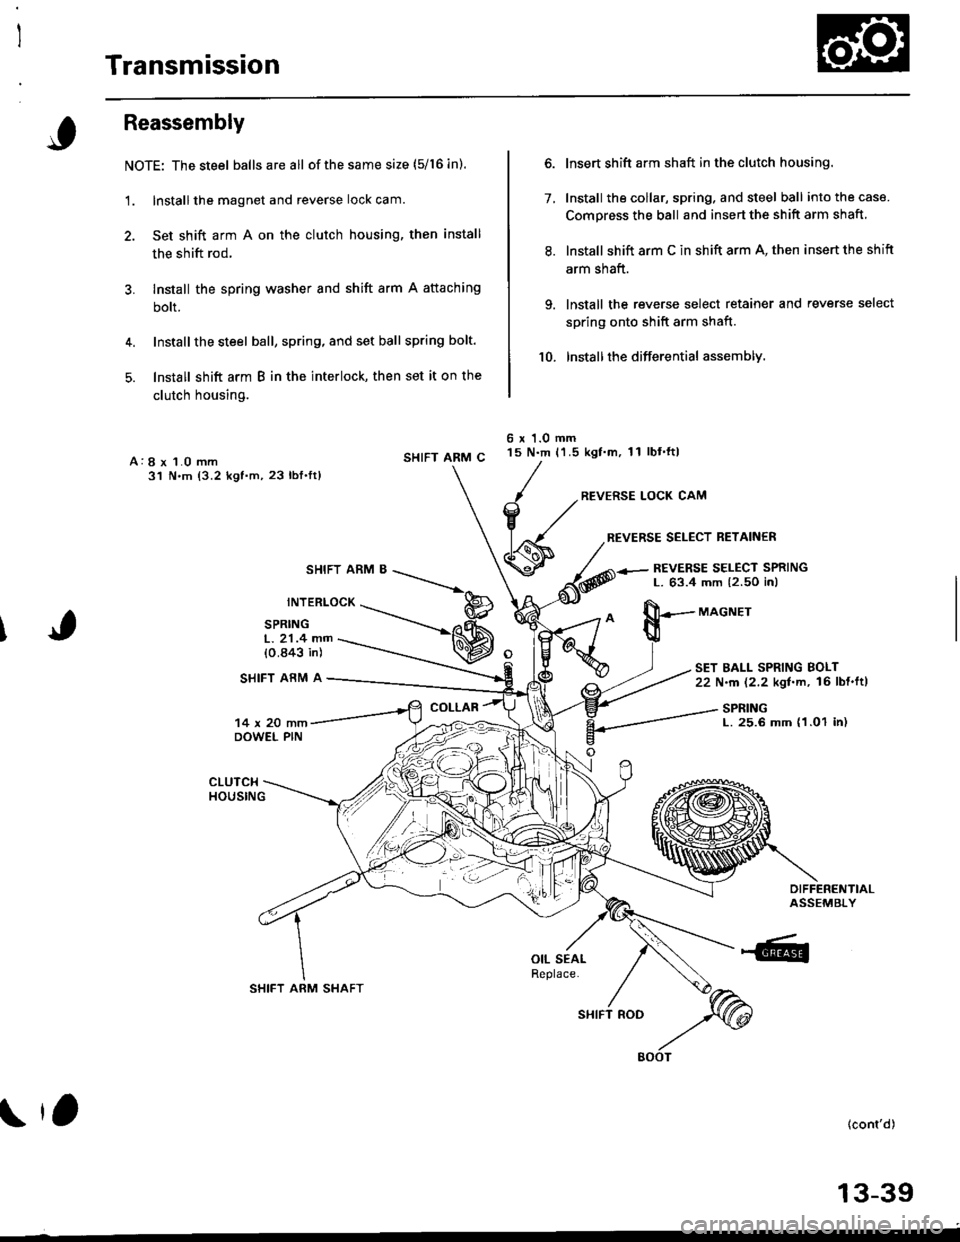 HONDA CIVIC 1997 6.G Workshop Manual Transmission
Reassembly
NOTE: The steel balls are all ofthe same size (5/16 in).
1. Install the magnet and reverse lock cam.
2. Set shift arm A on the clutch housing, then install
the shift rod.
3. In